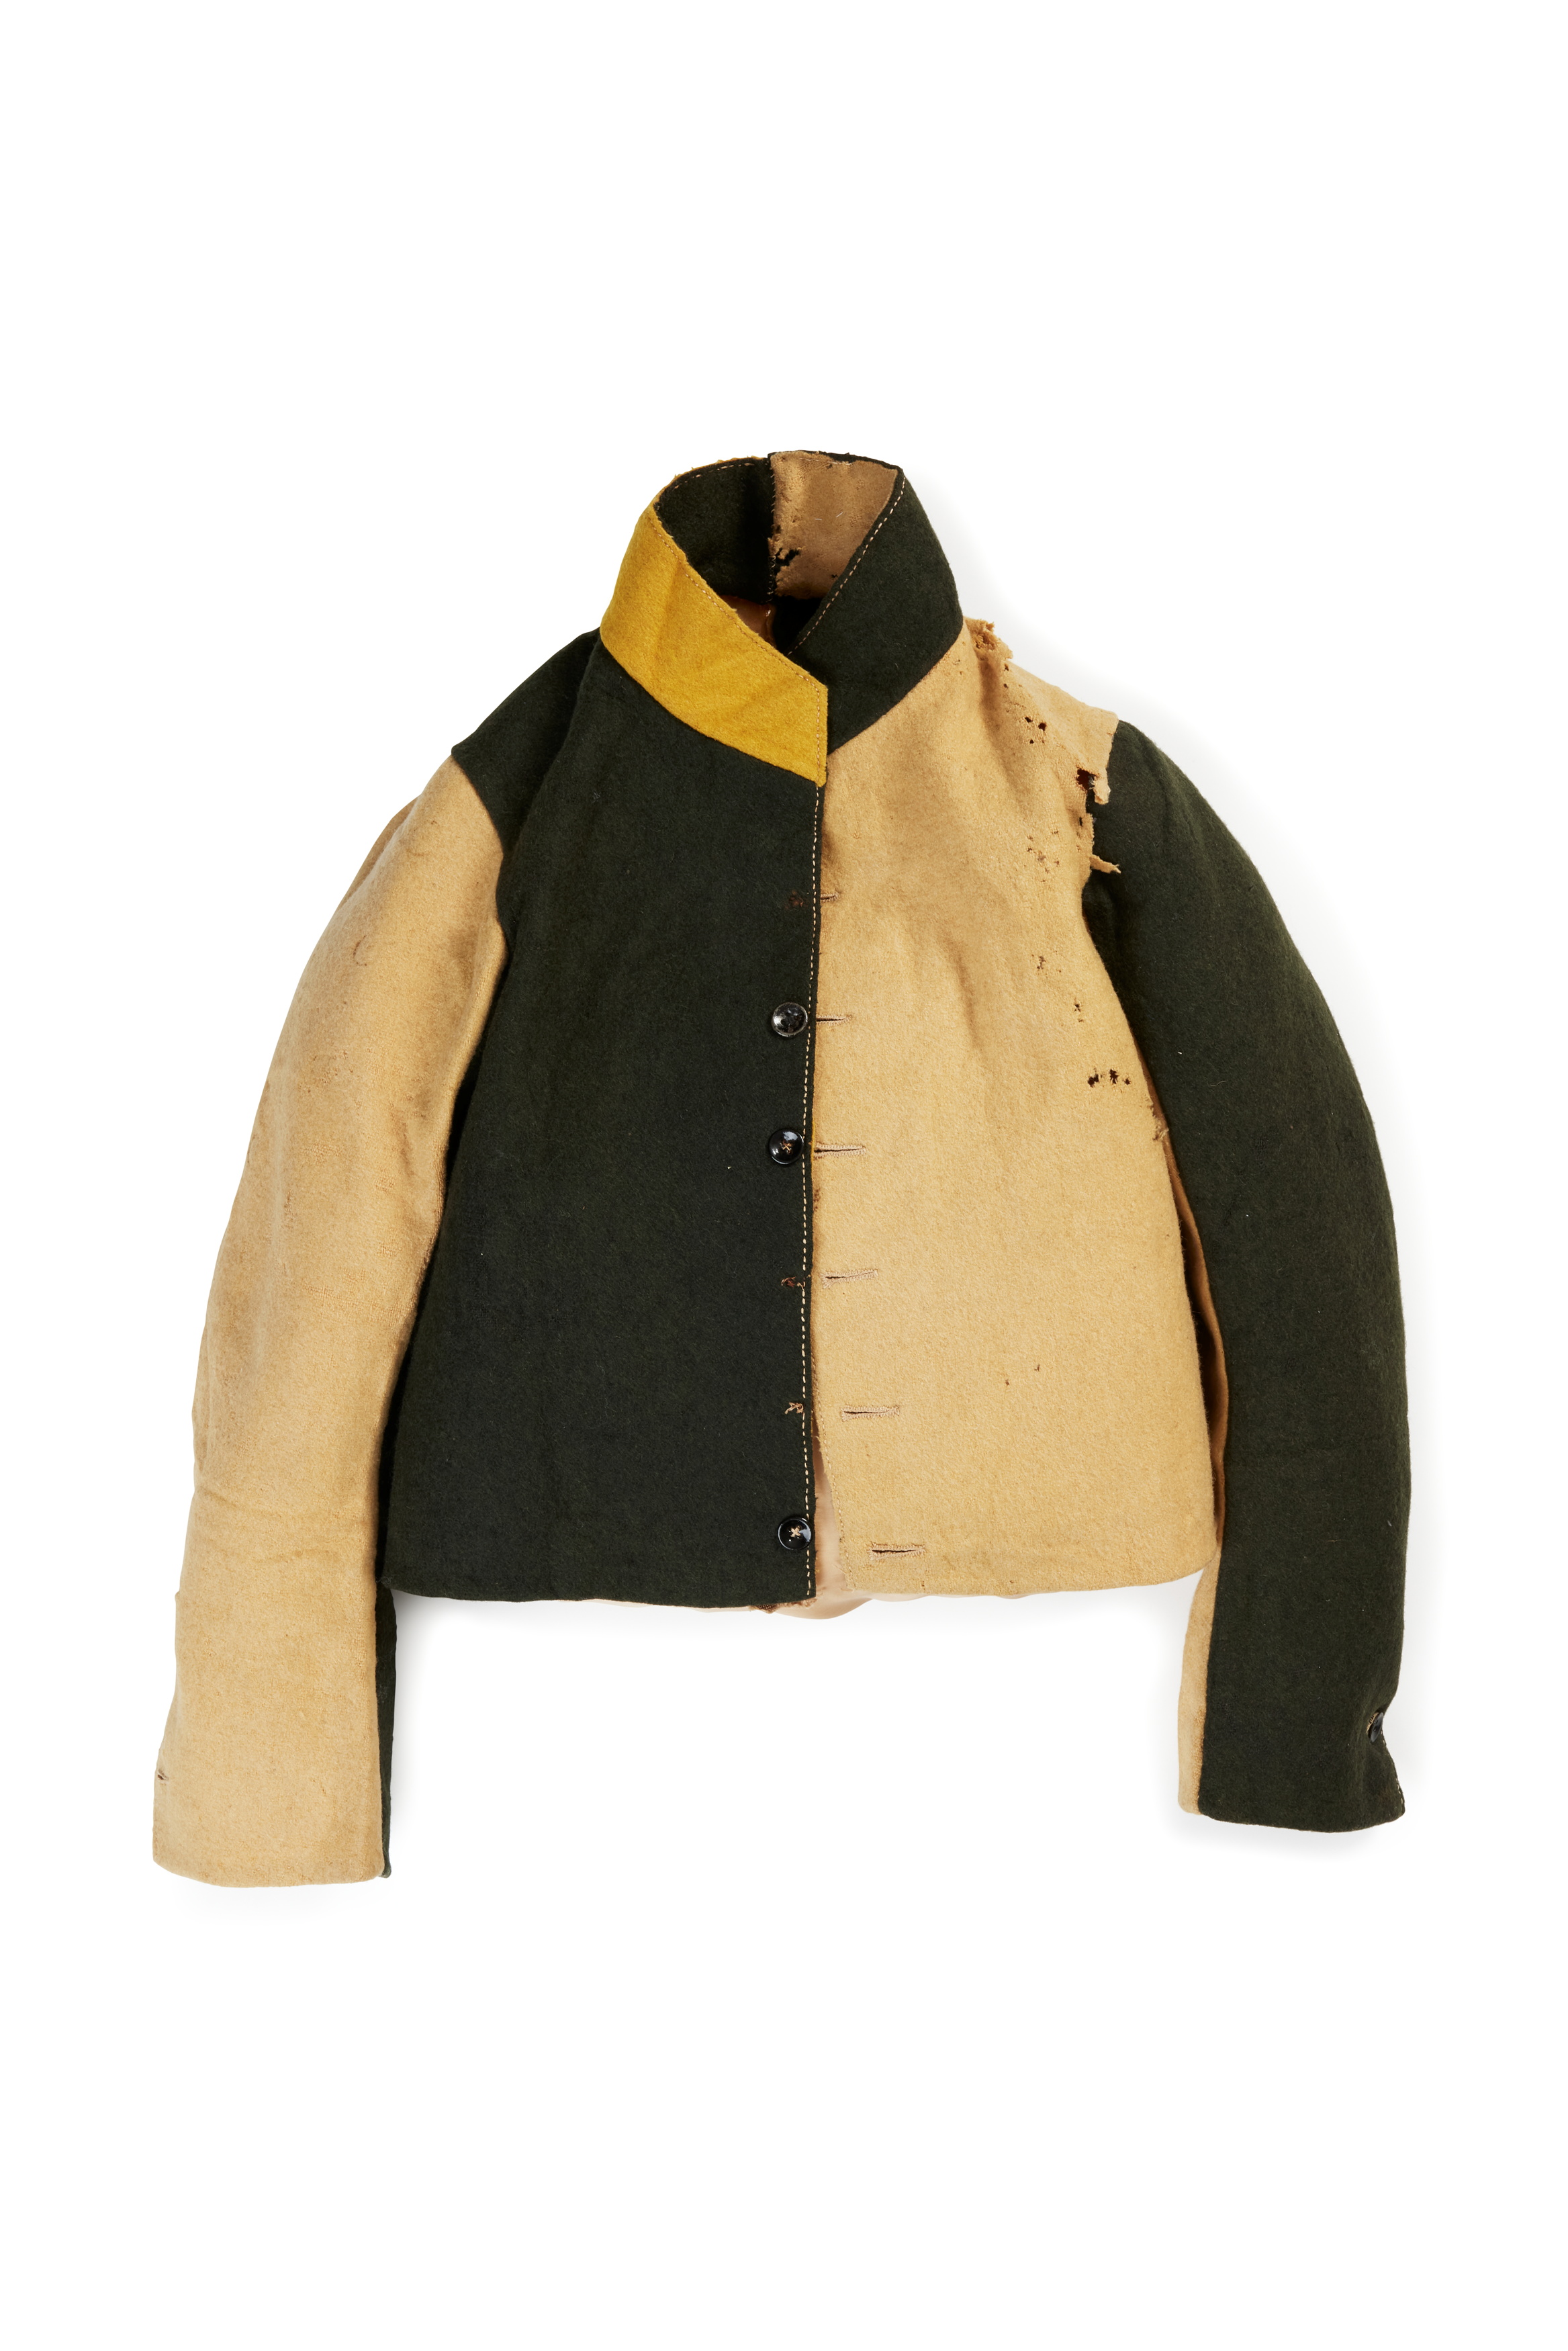 Convict jacket from England worn in Australia